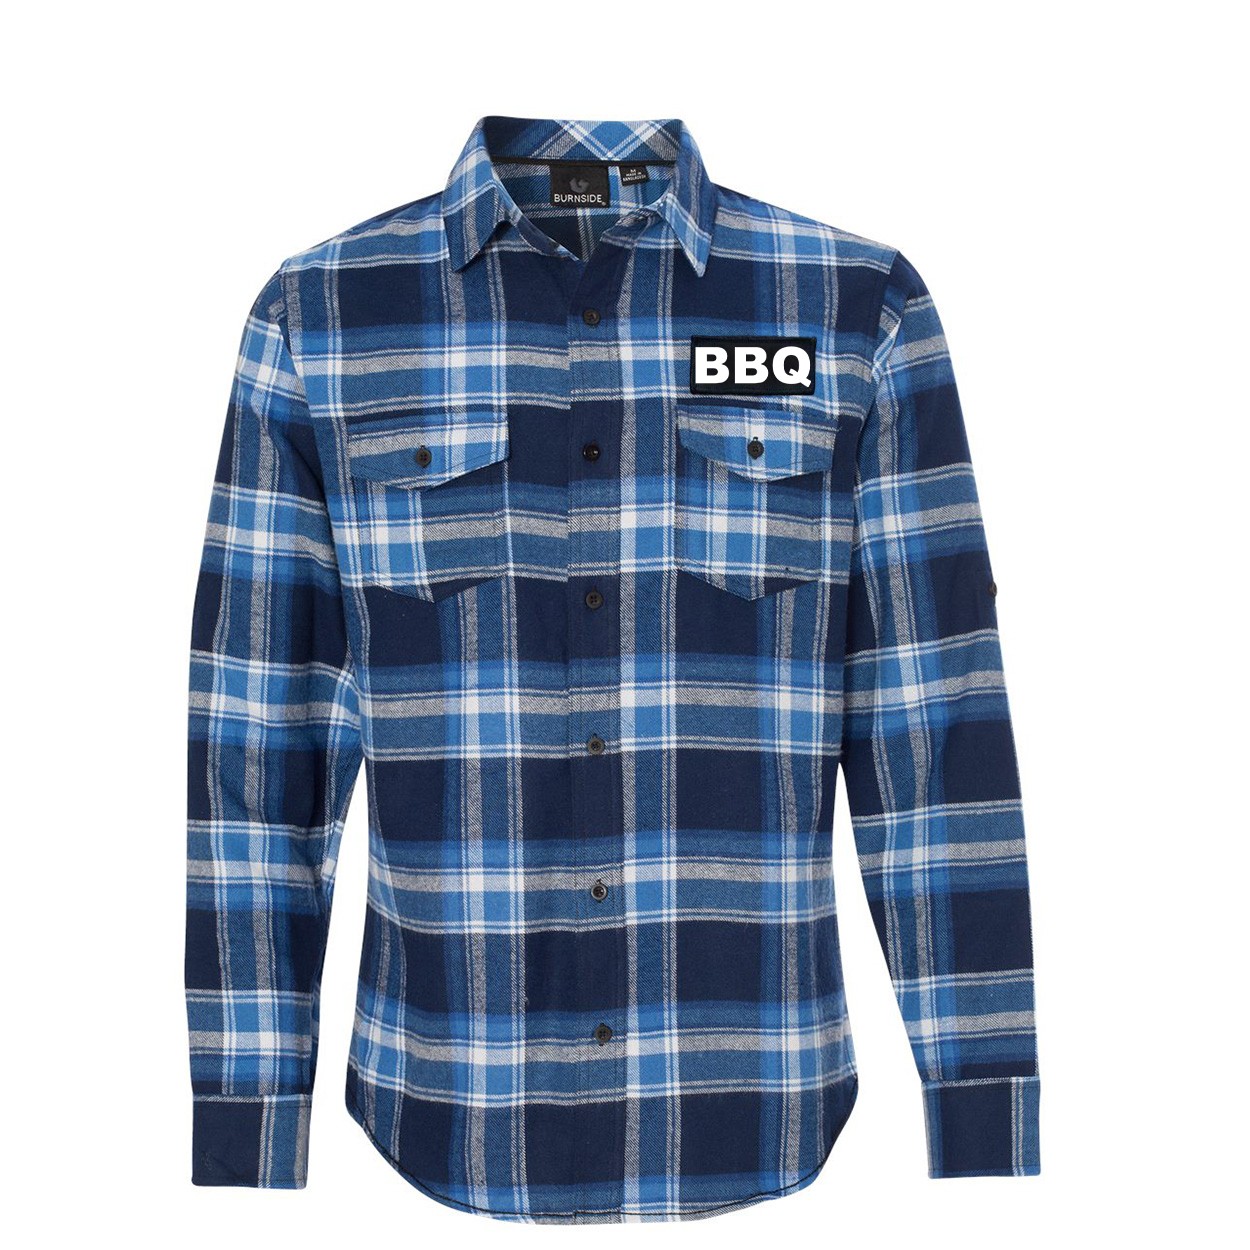 BBQ Brand Logo Night Out Rectangle Woven Patch Flannel Shirt Long Sleeve Blue/White (White Logo)